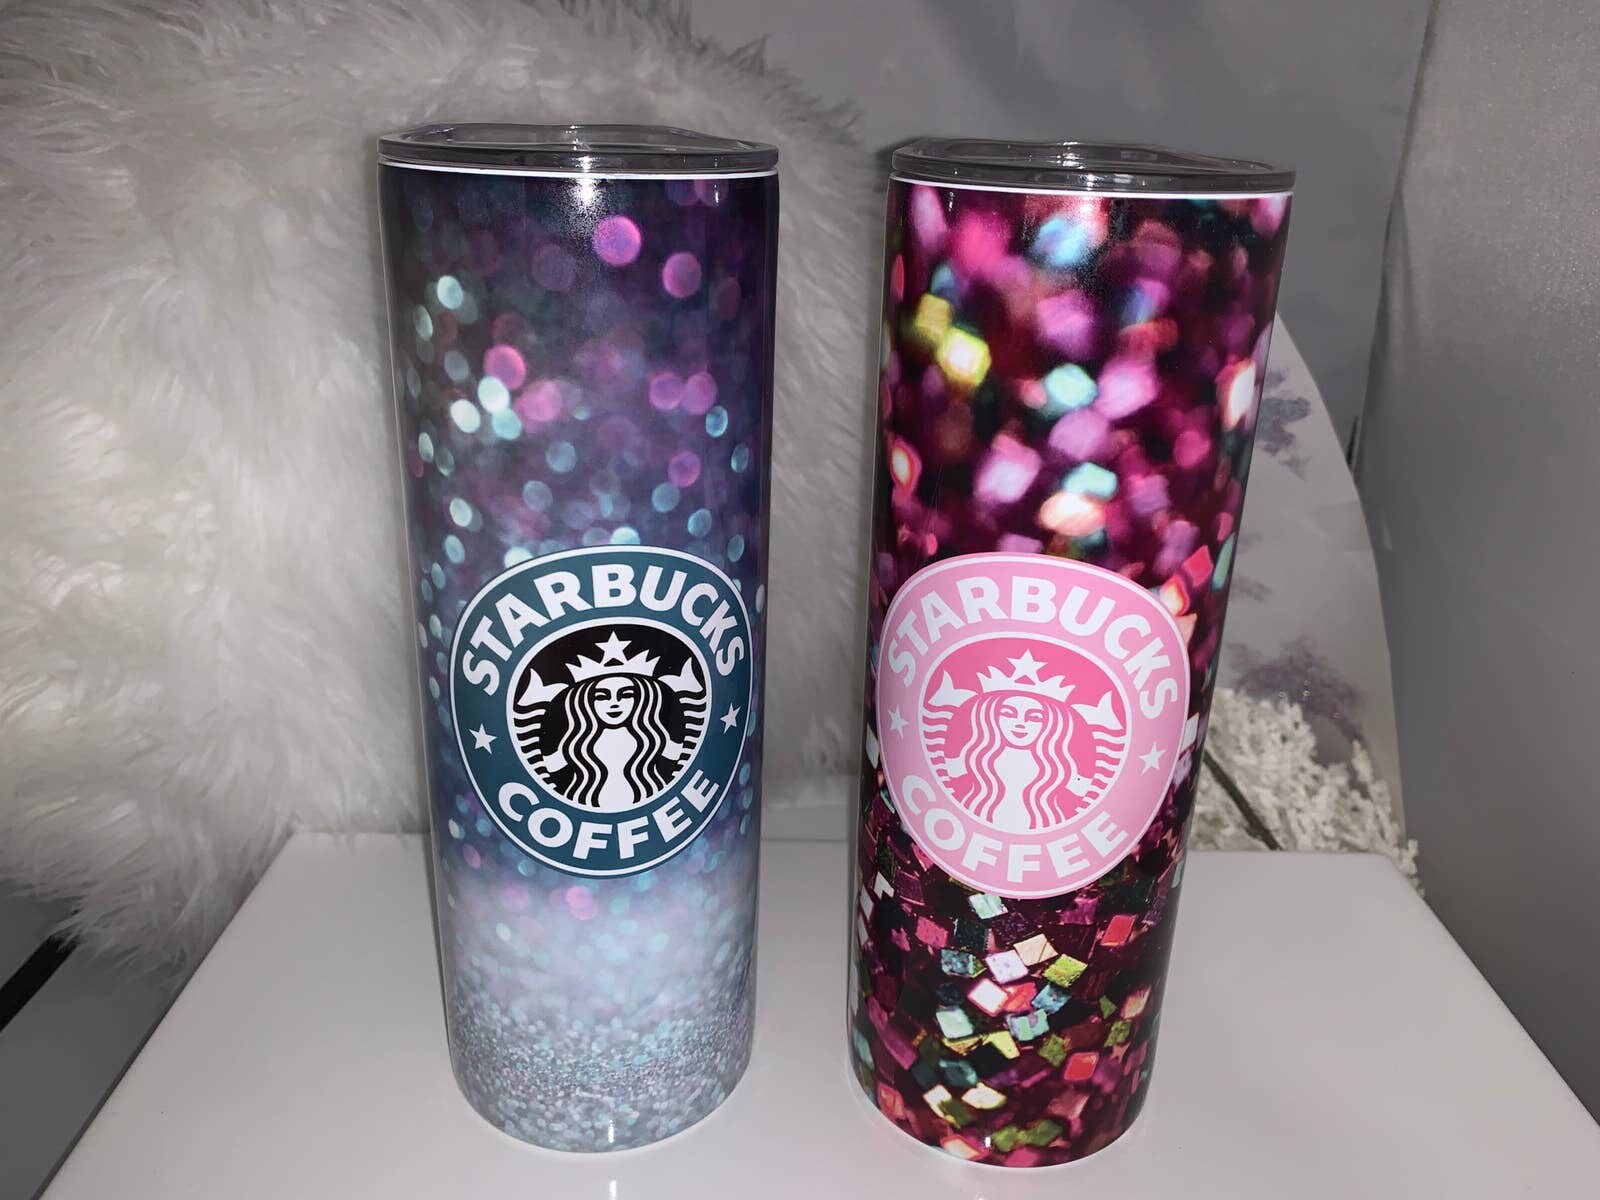 Where to Find Your Very Own Starbucks Matte Pink Spiked Tumbler: Join the  Social Media Frenzy!